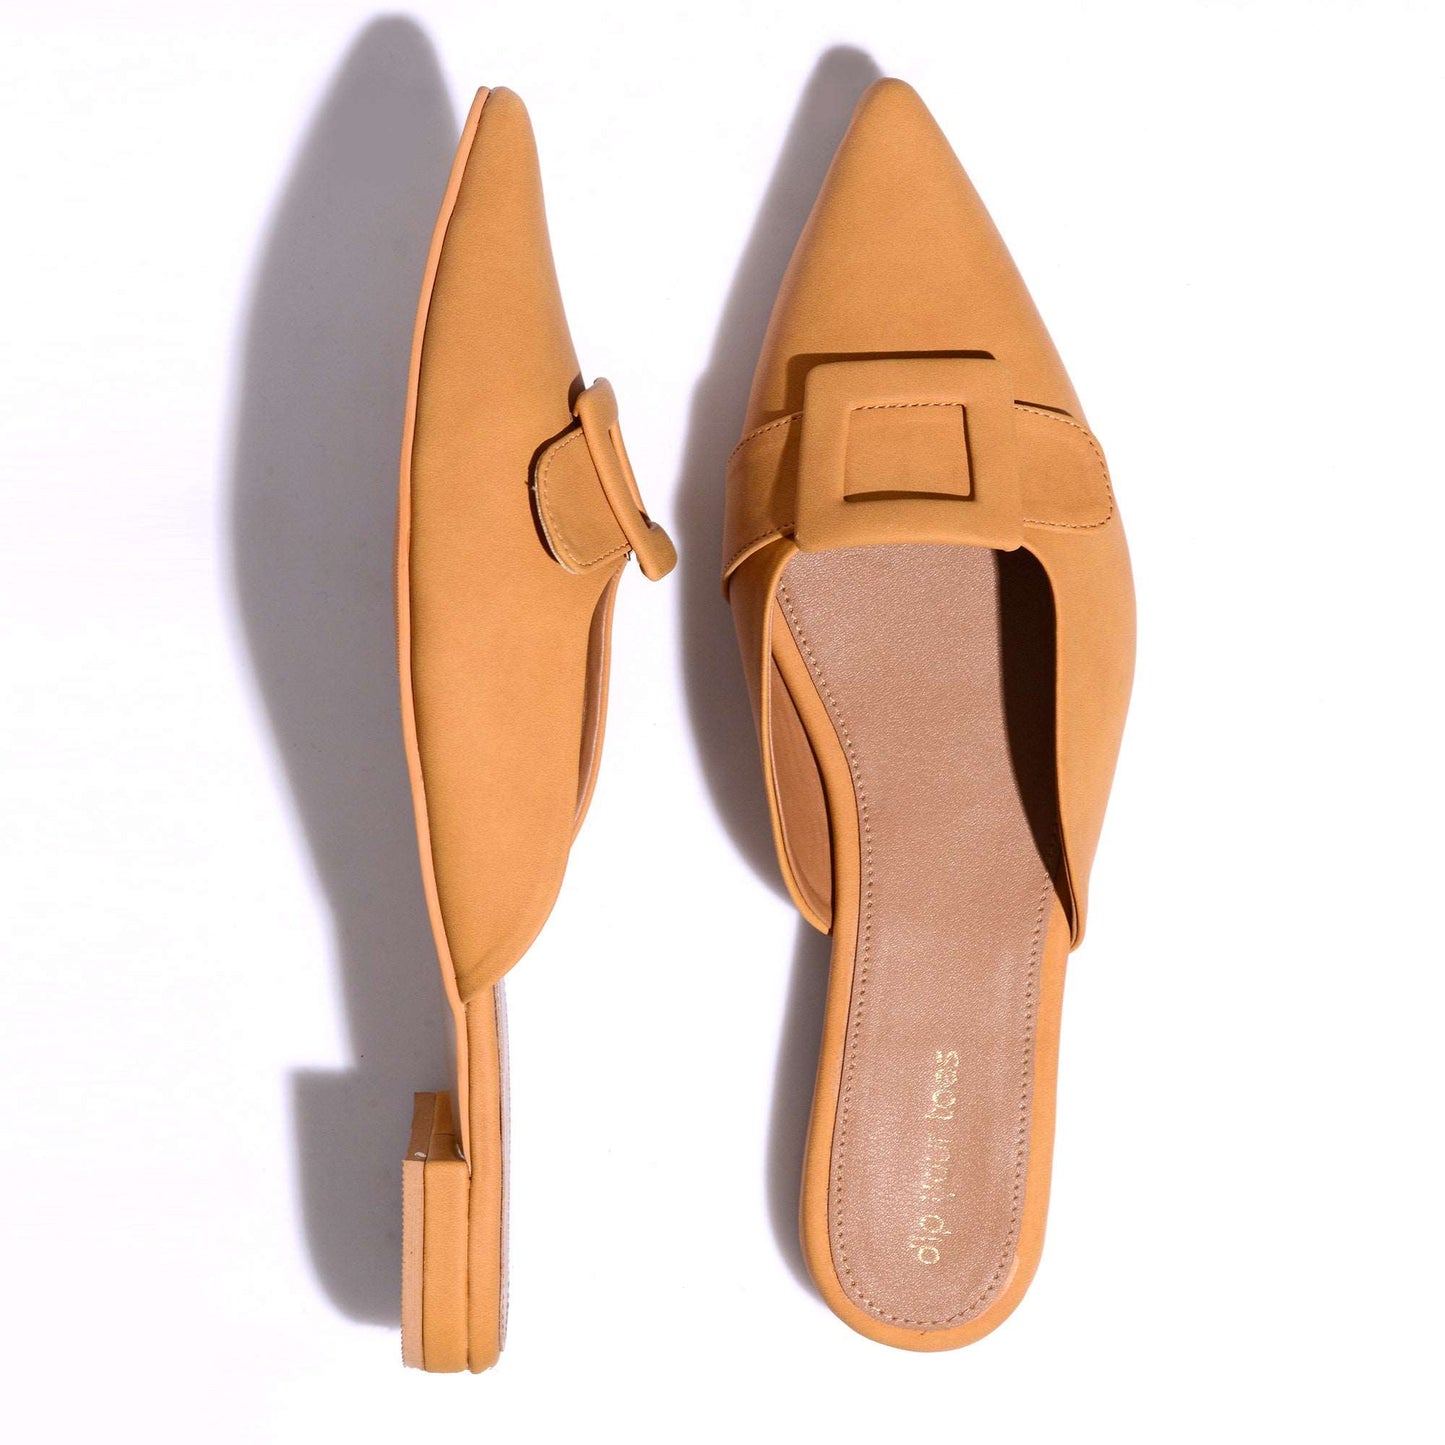 Marigold Buckled Mules